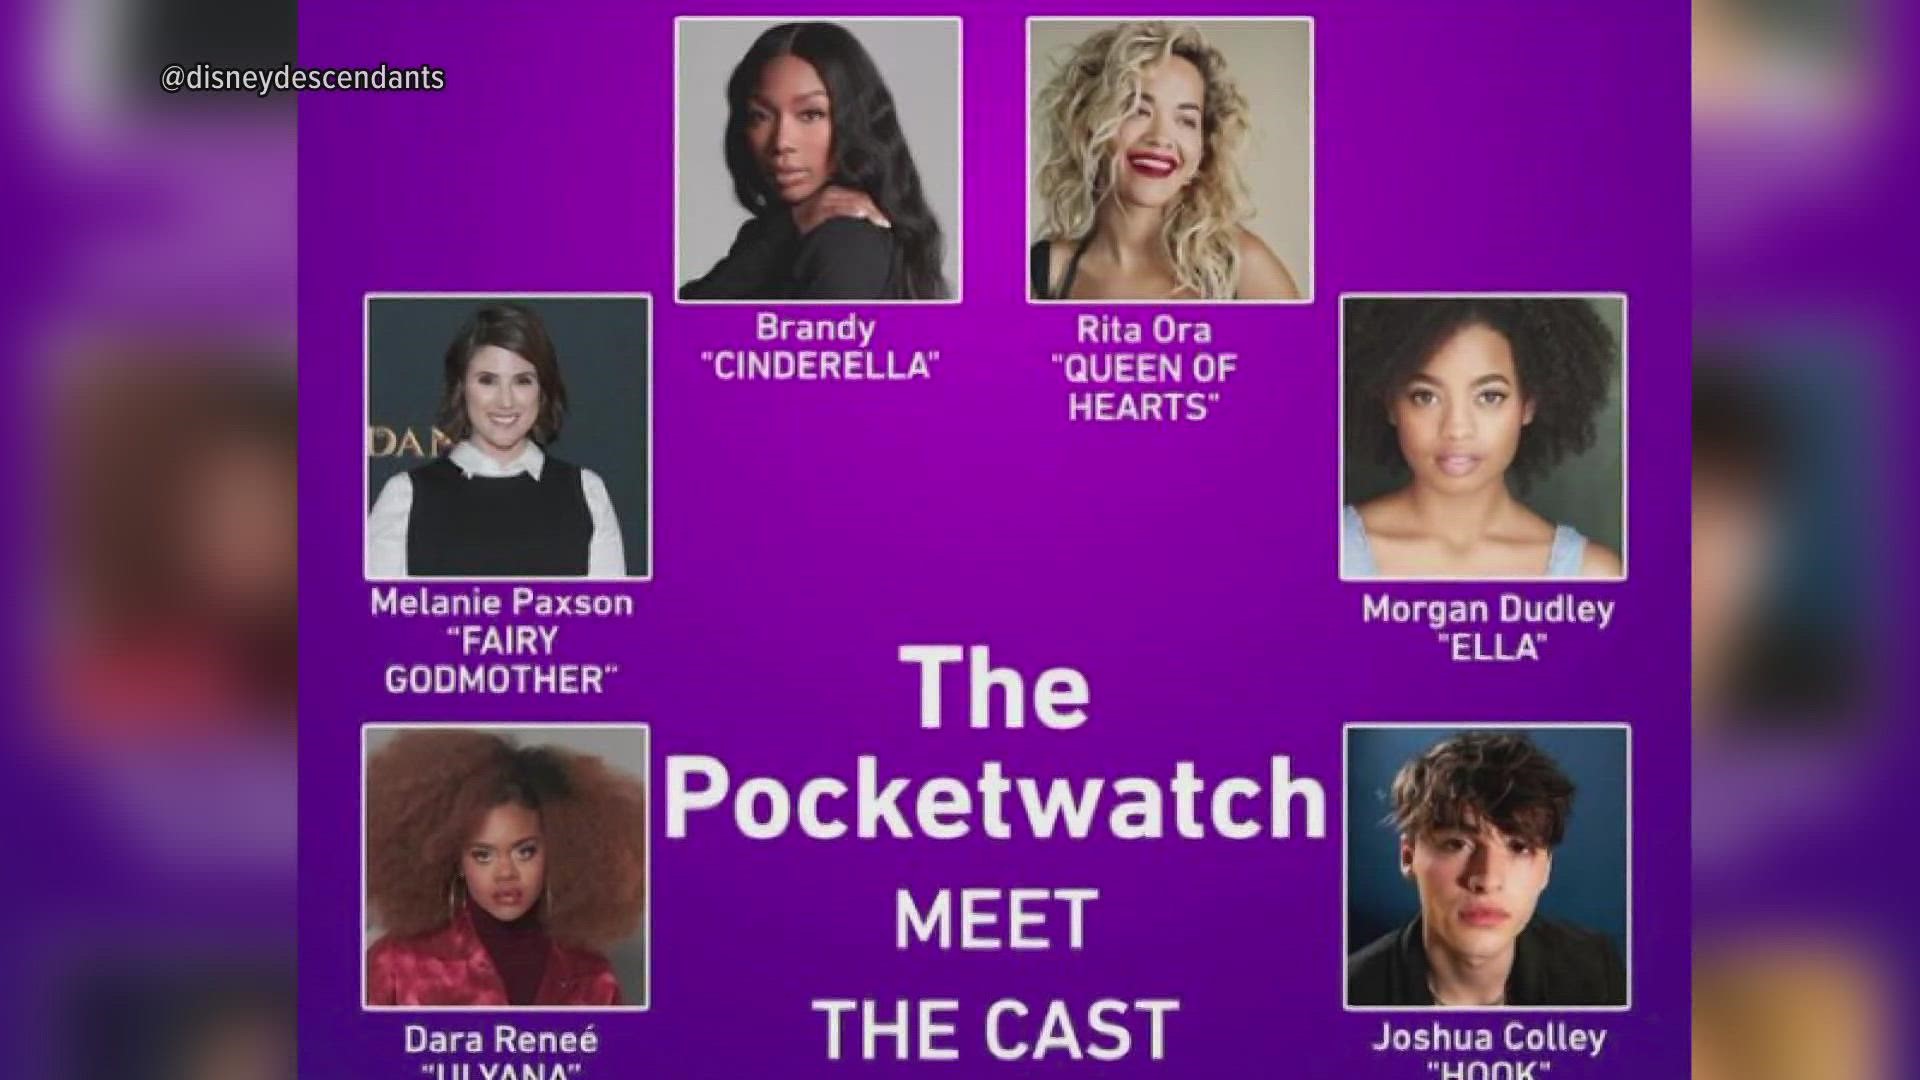 Superstar Brandy Norwood in set to reprise her role of Cinderella in Disney's The Pocketwatch. The Texas Today crew shares their thoughts on this magical moment.